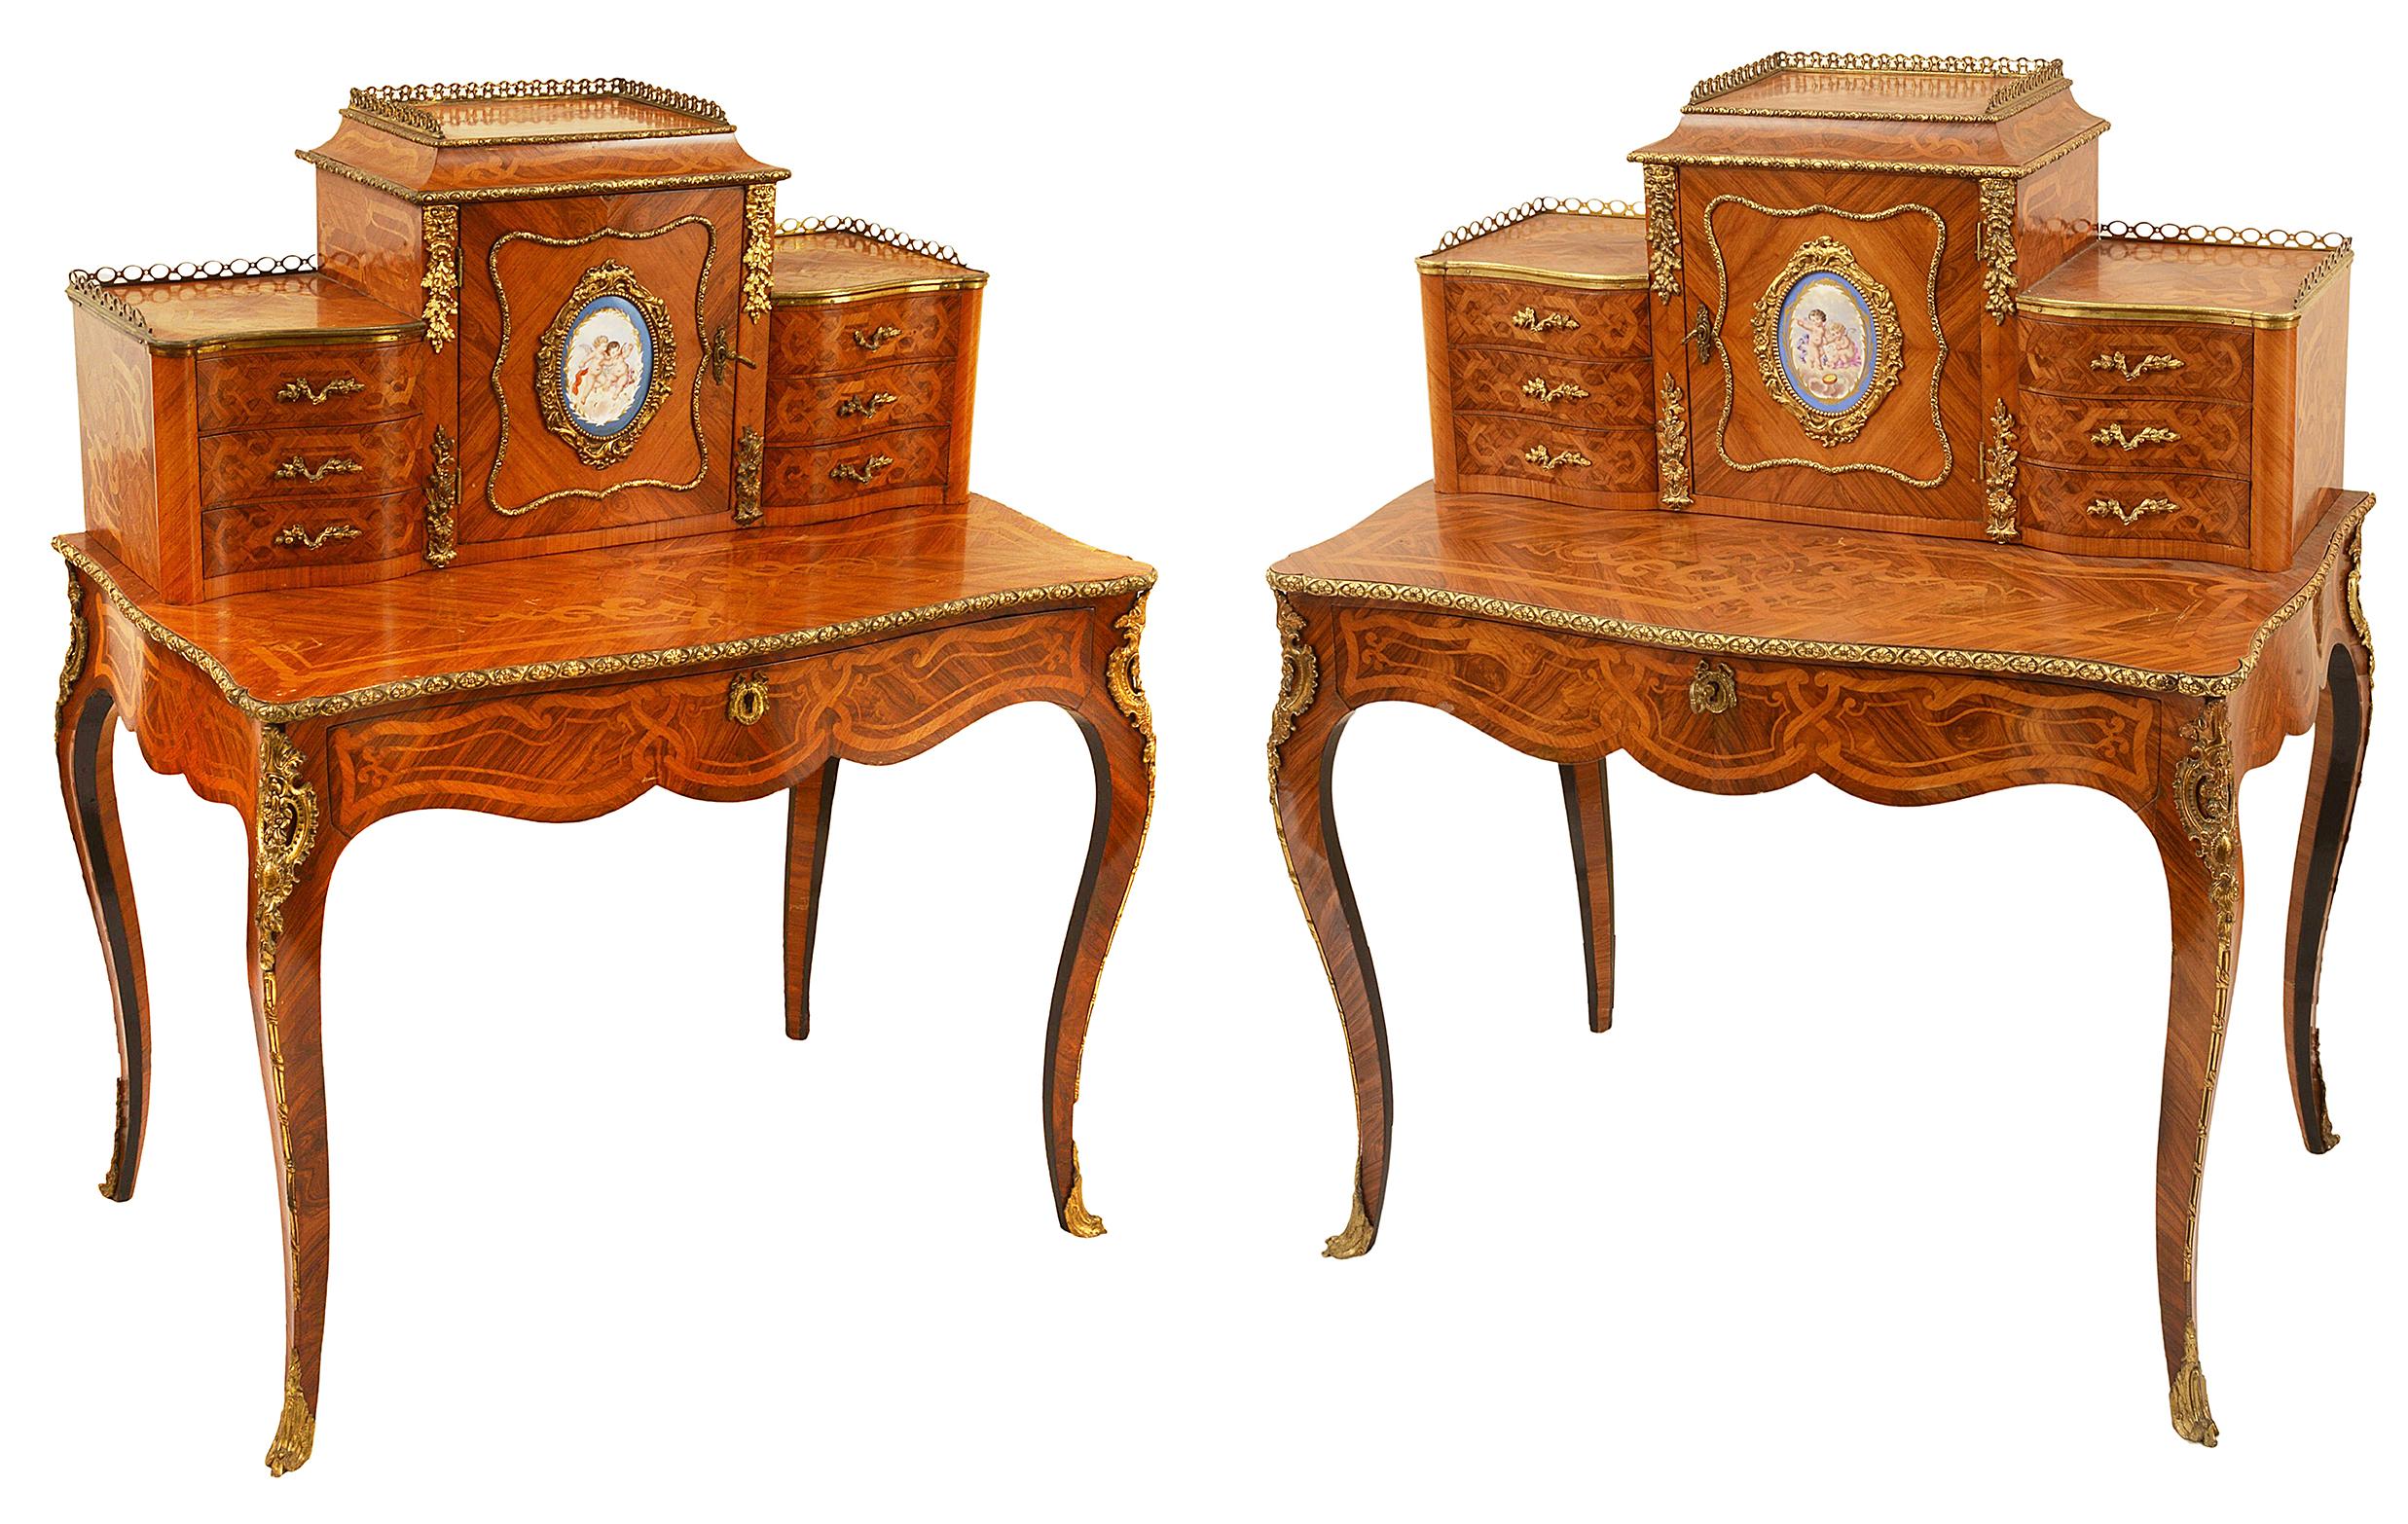 Rare pair of 19th Century French Kingwood and Tulip wood veneered Bonheur du jours, each with pierced three quarter brass galleries, gilded ormolu mounts, three drawers either side of the central door, an inset Sevres style hand painted porcelain